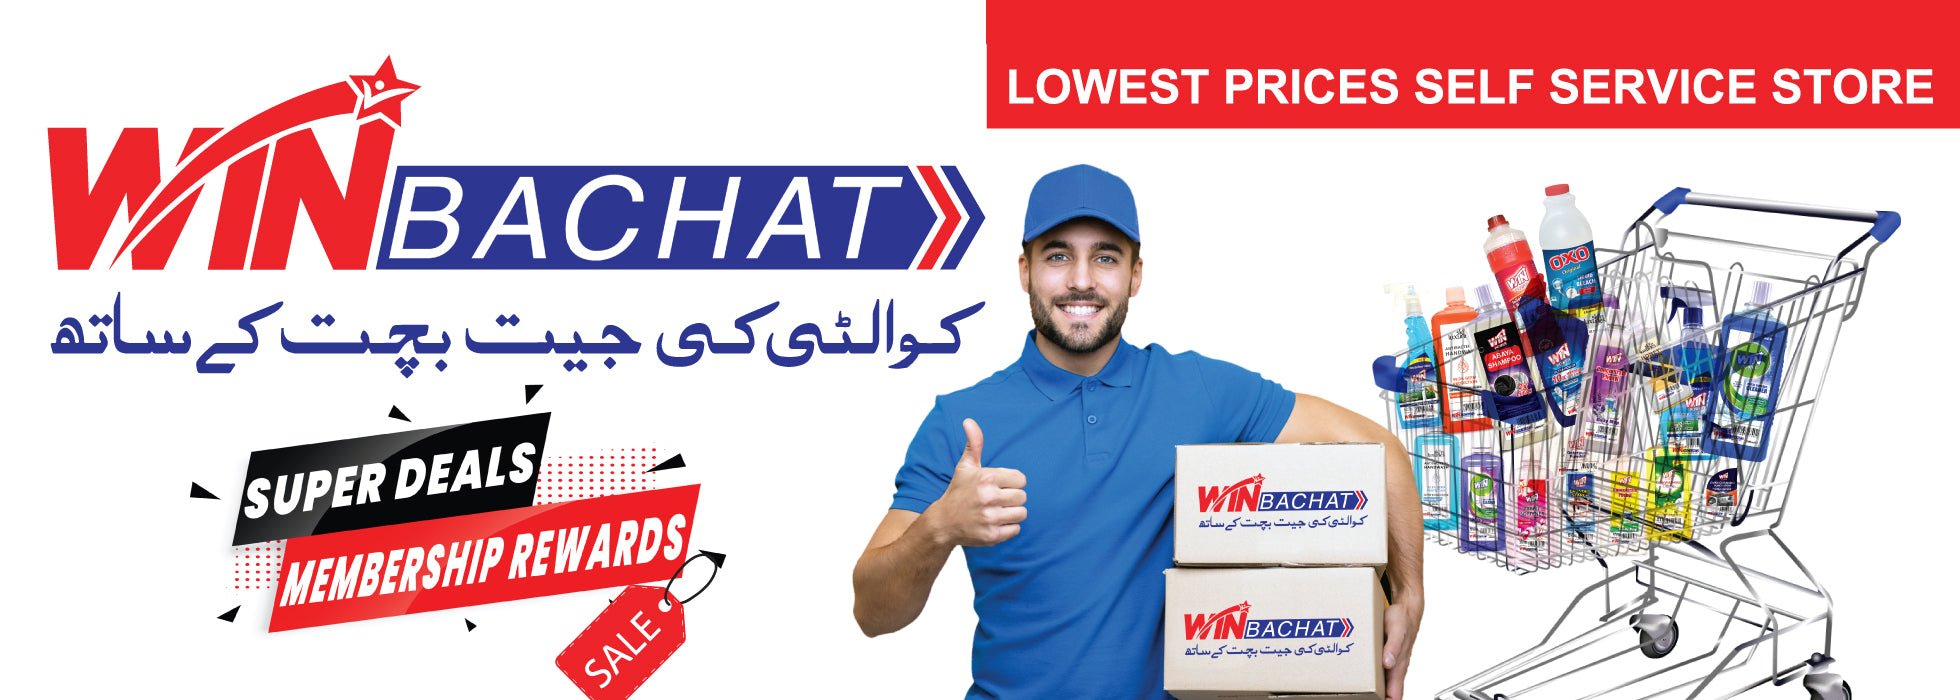 Win Bachat - Janitorial - Stancos World